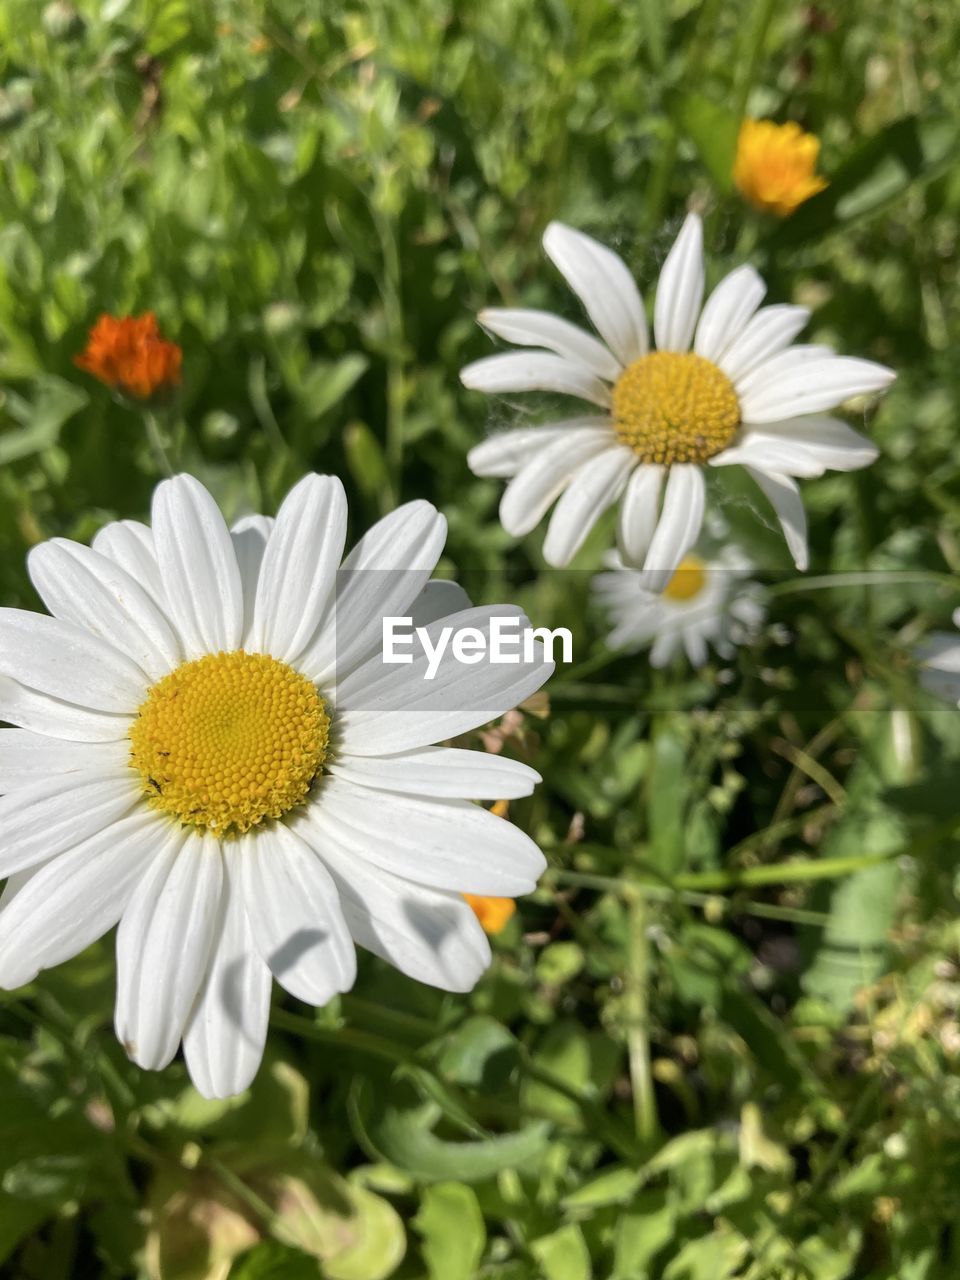 flower, flowering plant, plant, freshness, beauty in nature, fragility, petal, flower head, growth, inflorescence, white, close-up, pollen, nature, daisy, focus on foreground, no people, botany, day, yellow, outdoors, wildflower, green, meadow, springtime, blossom